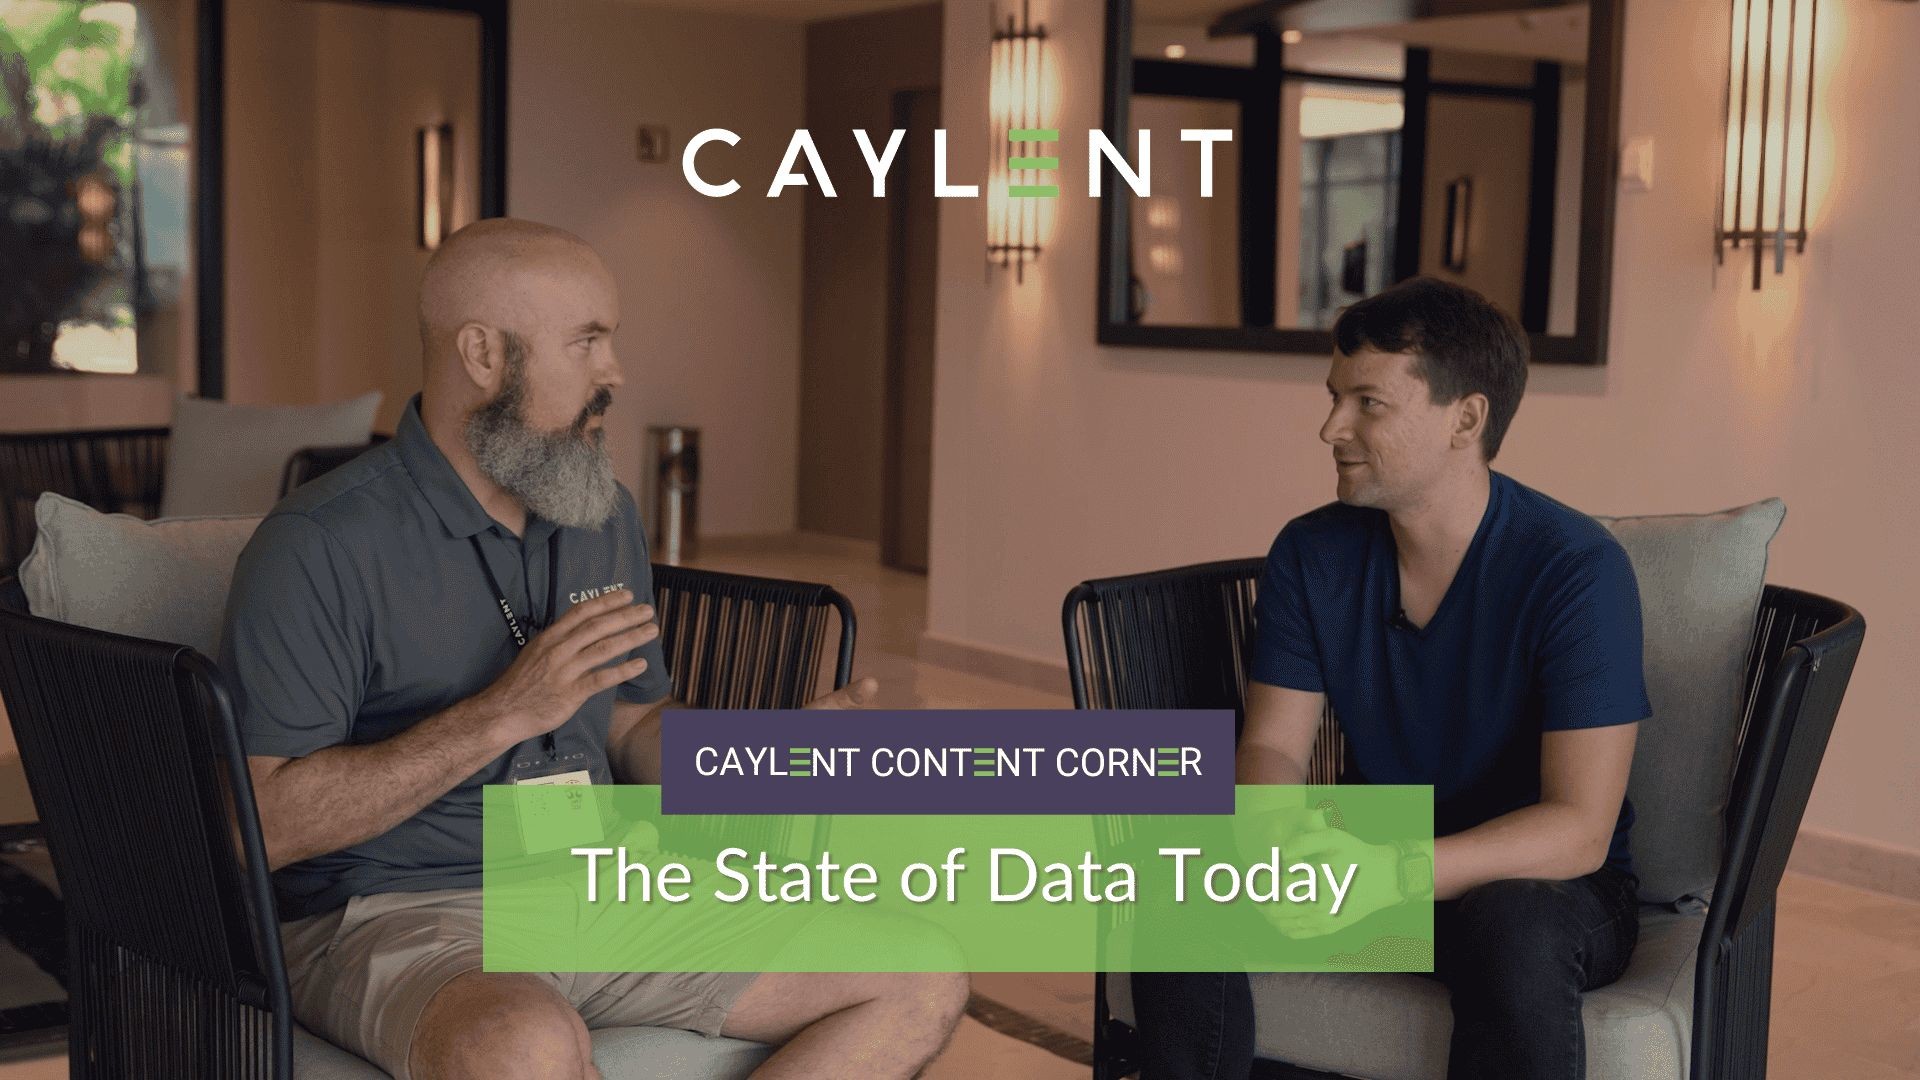 The State of Data Today